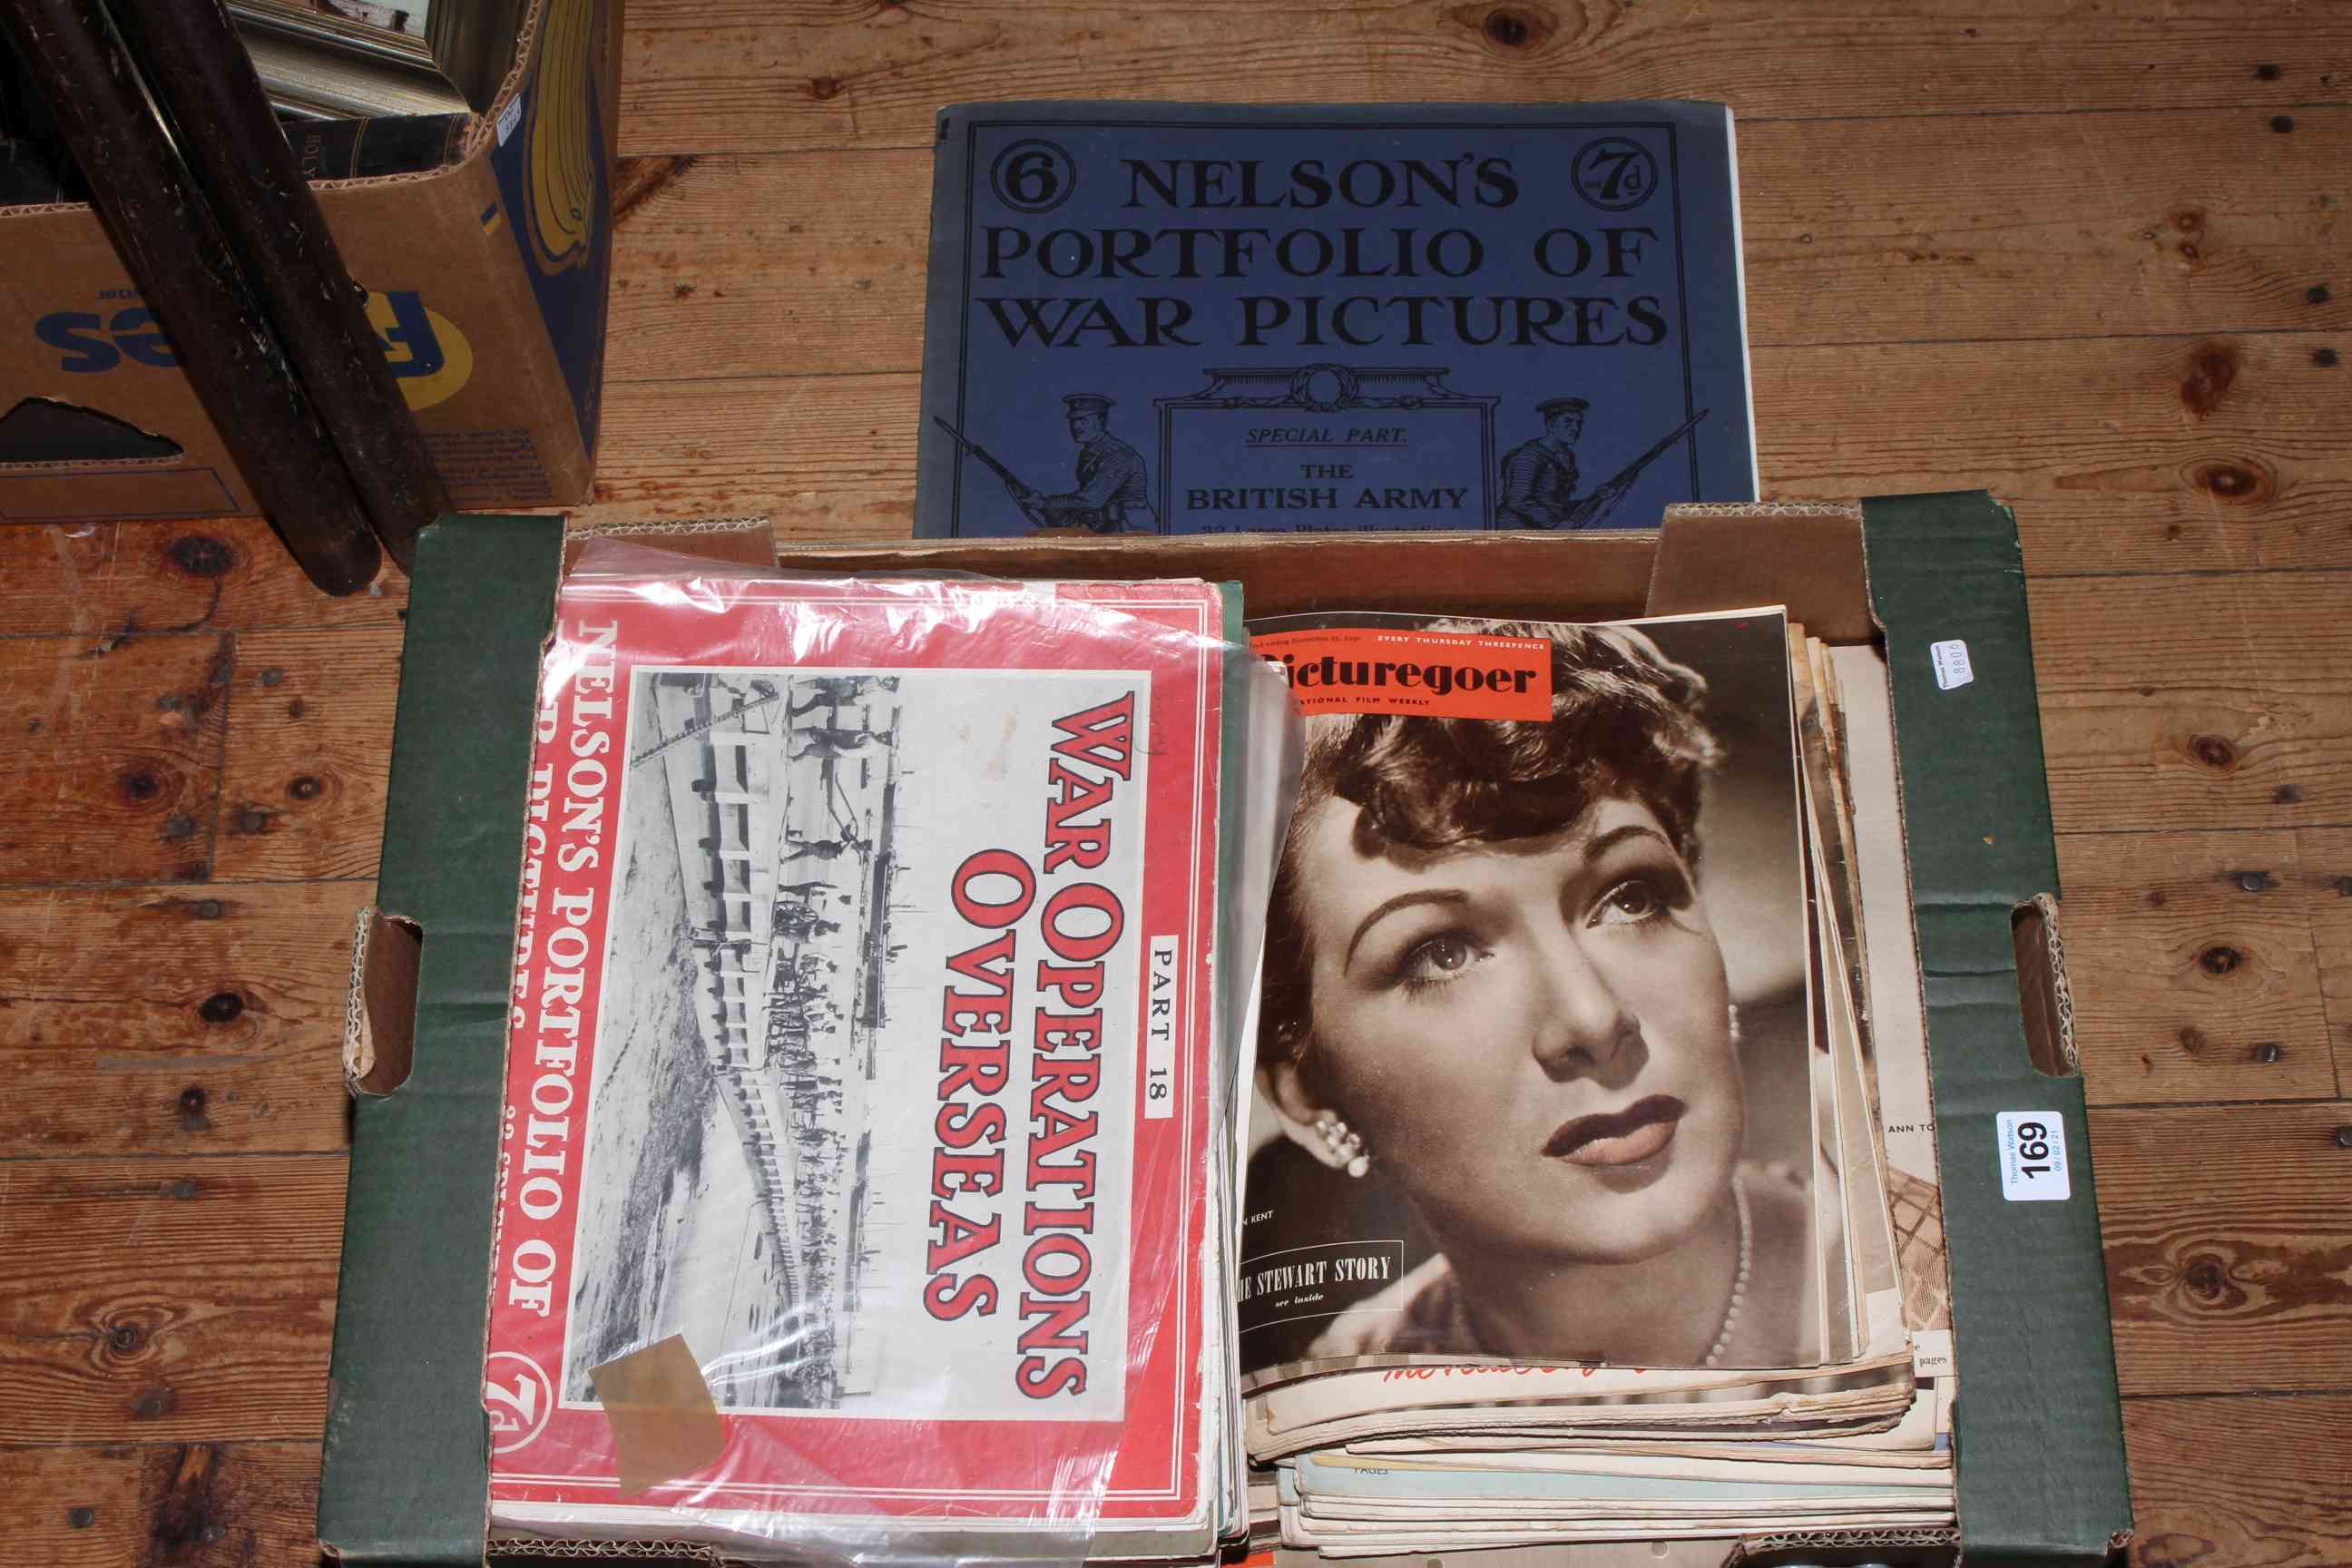 An interesting collection of vintage 1950's Picturegoer and Leader magazines,